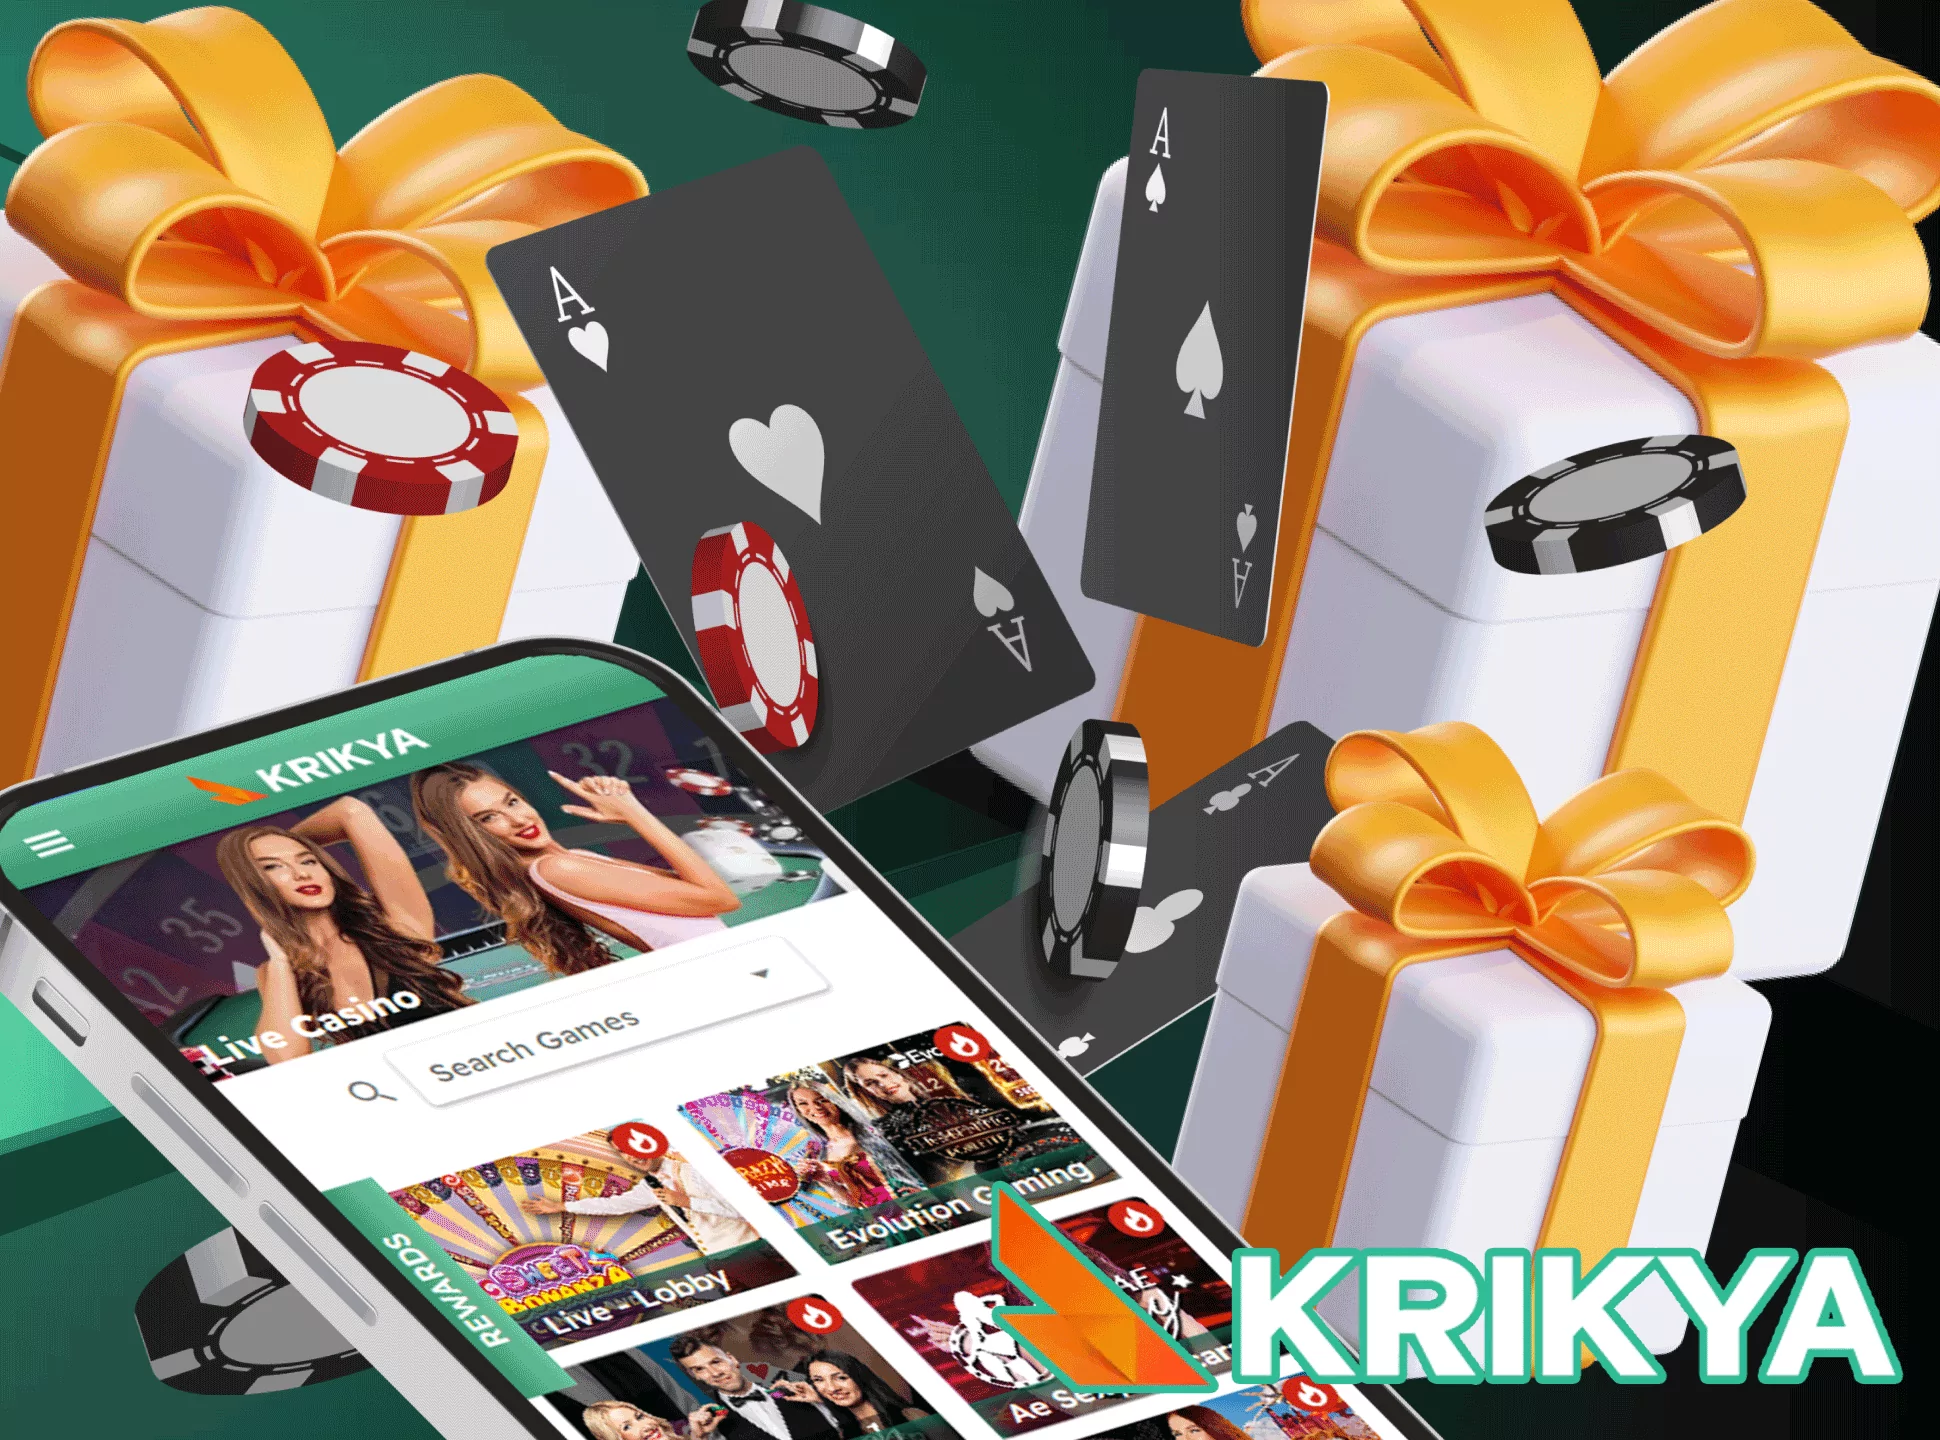 Welcome bonus can be also used in the Krikya casino section.